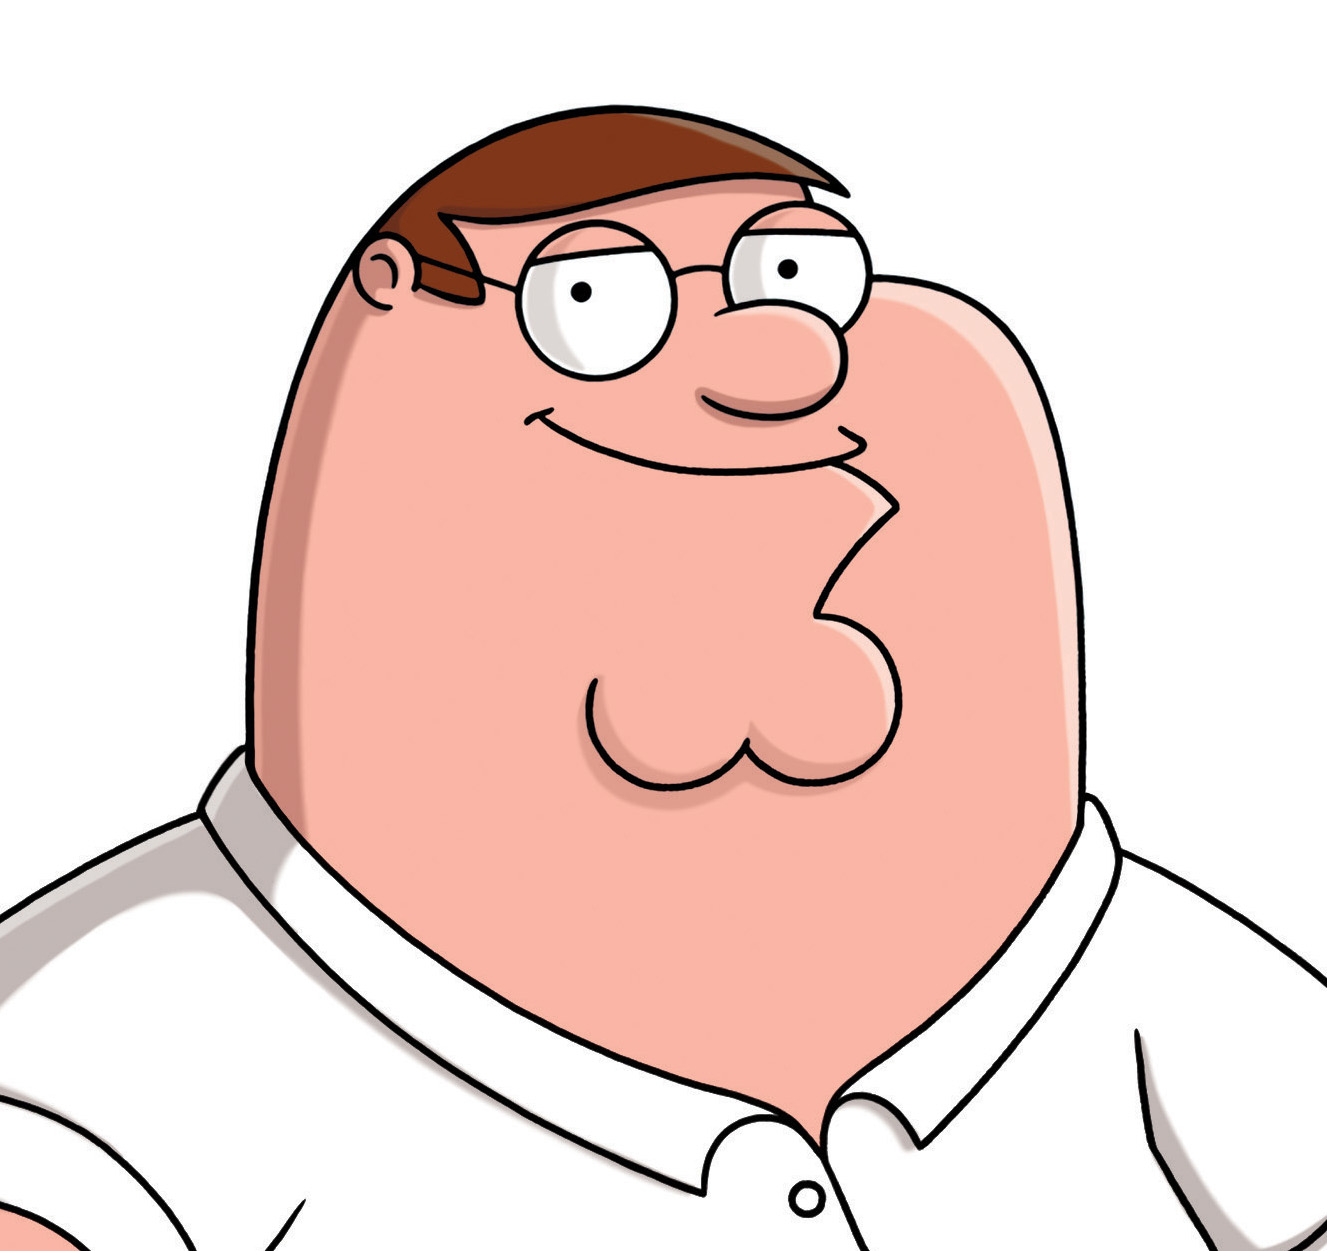 Peter Griffin Family Guy Cleft Chin facial detail